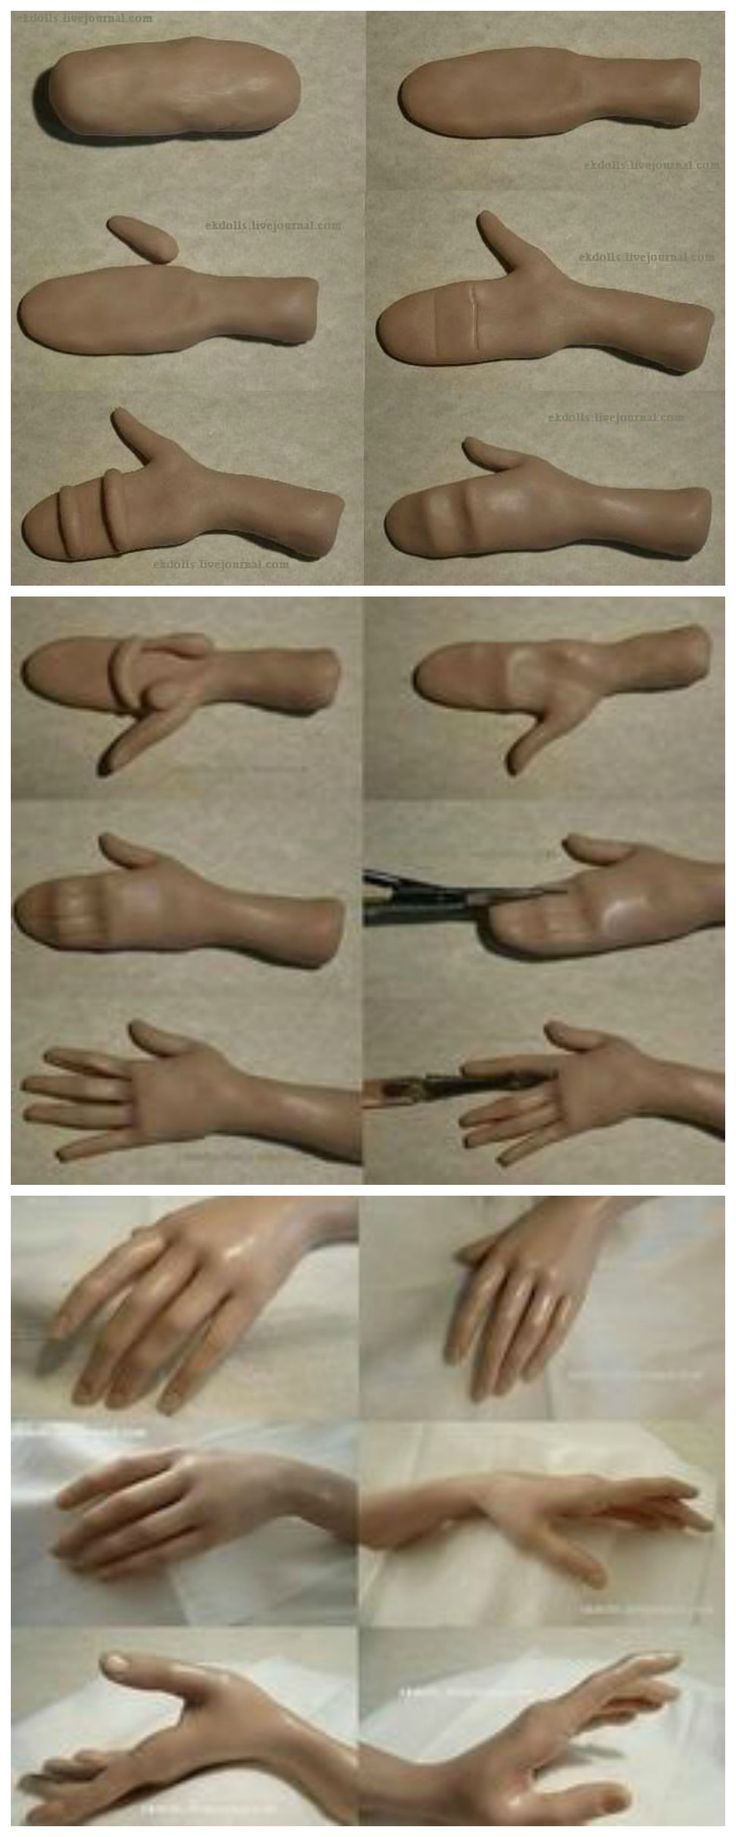 hands are shown with different angles and sizes